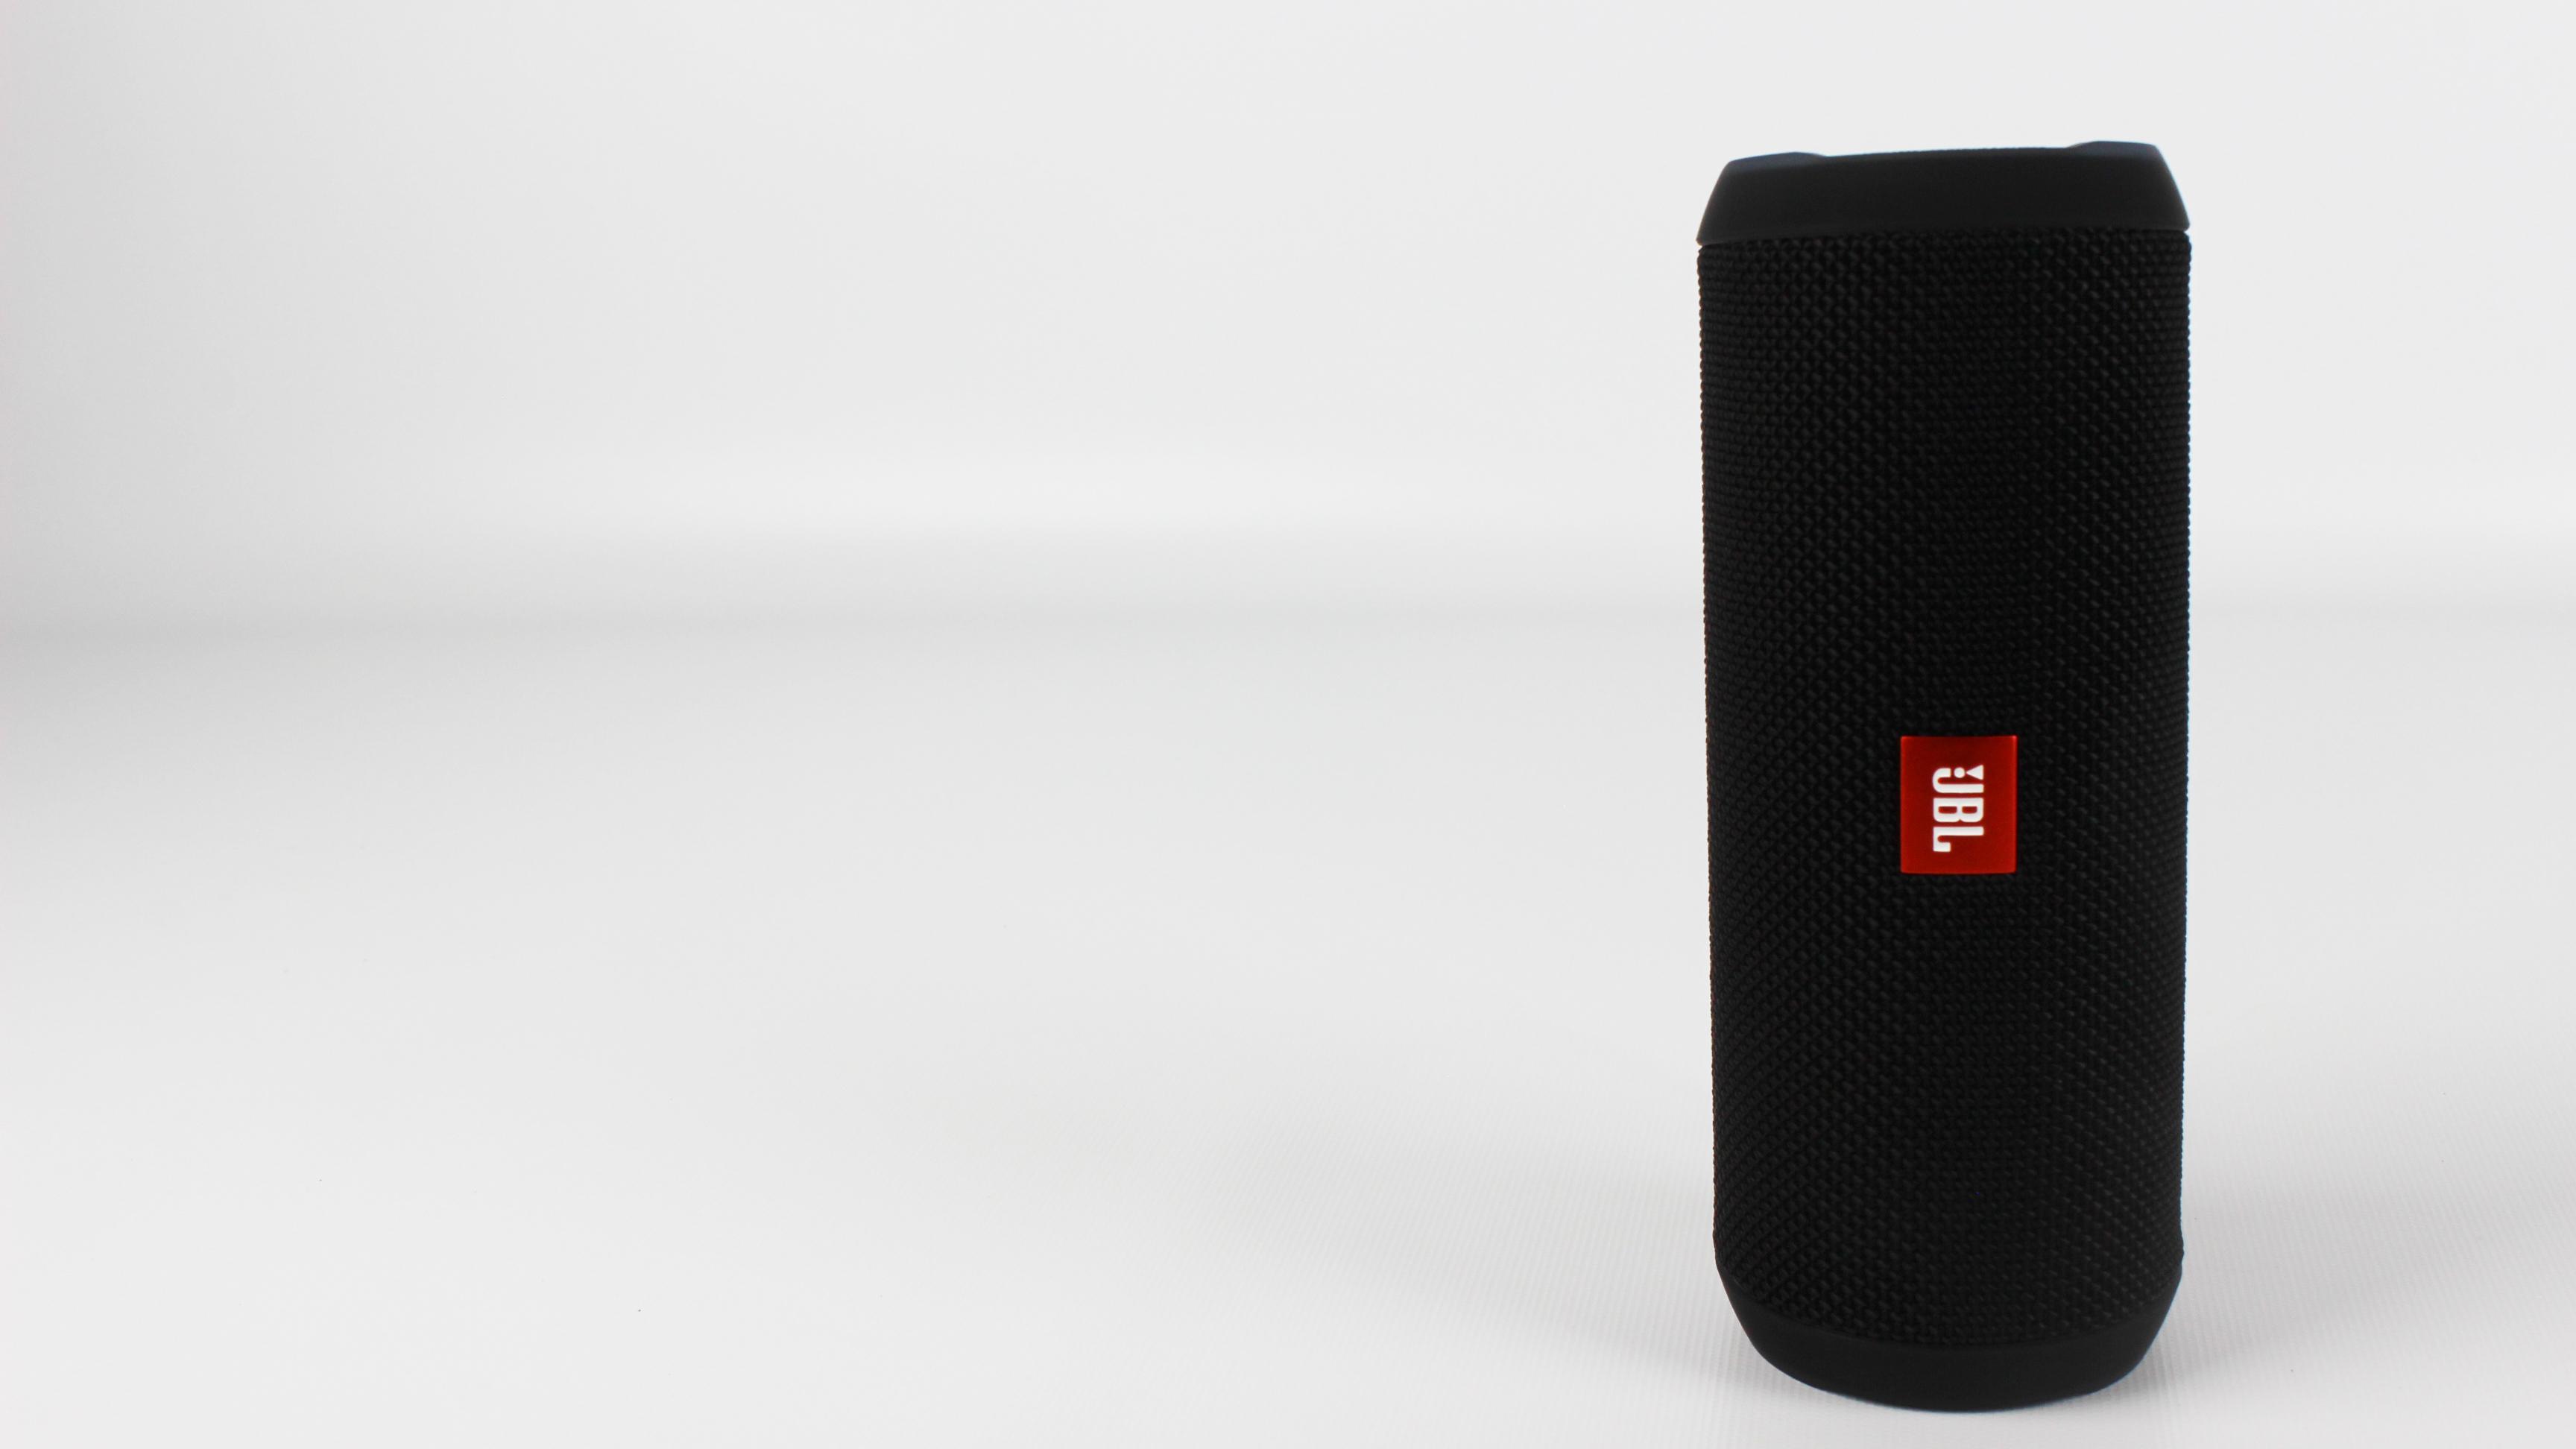 Pictured is the JBL Flip 3 standing upright. 